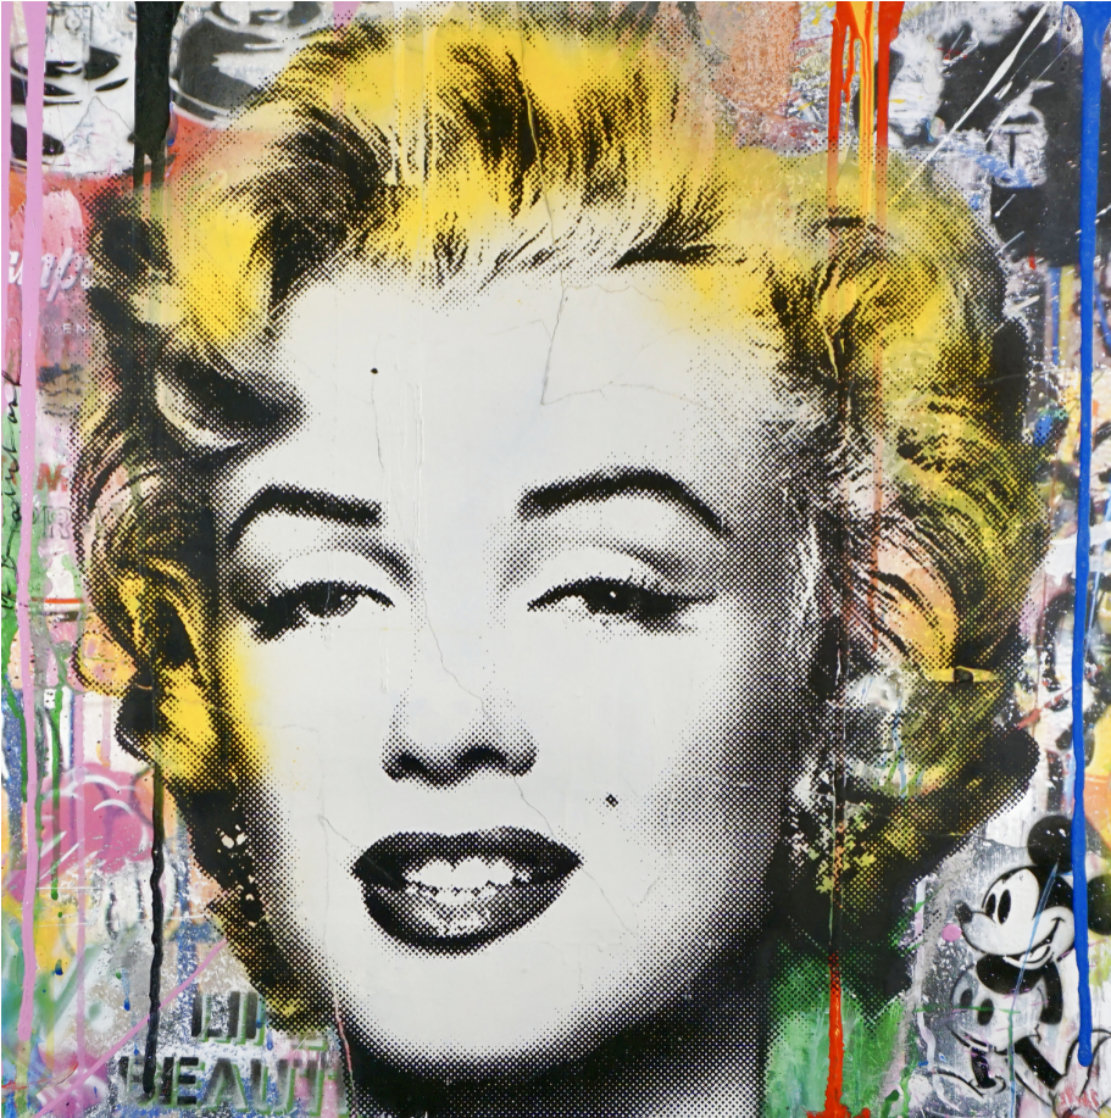 Marilyn Monroe Unique 2018 22x22 Works on Paper (not prints) by Mr. Brainwash